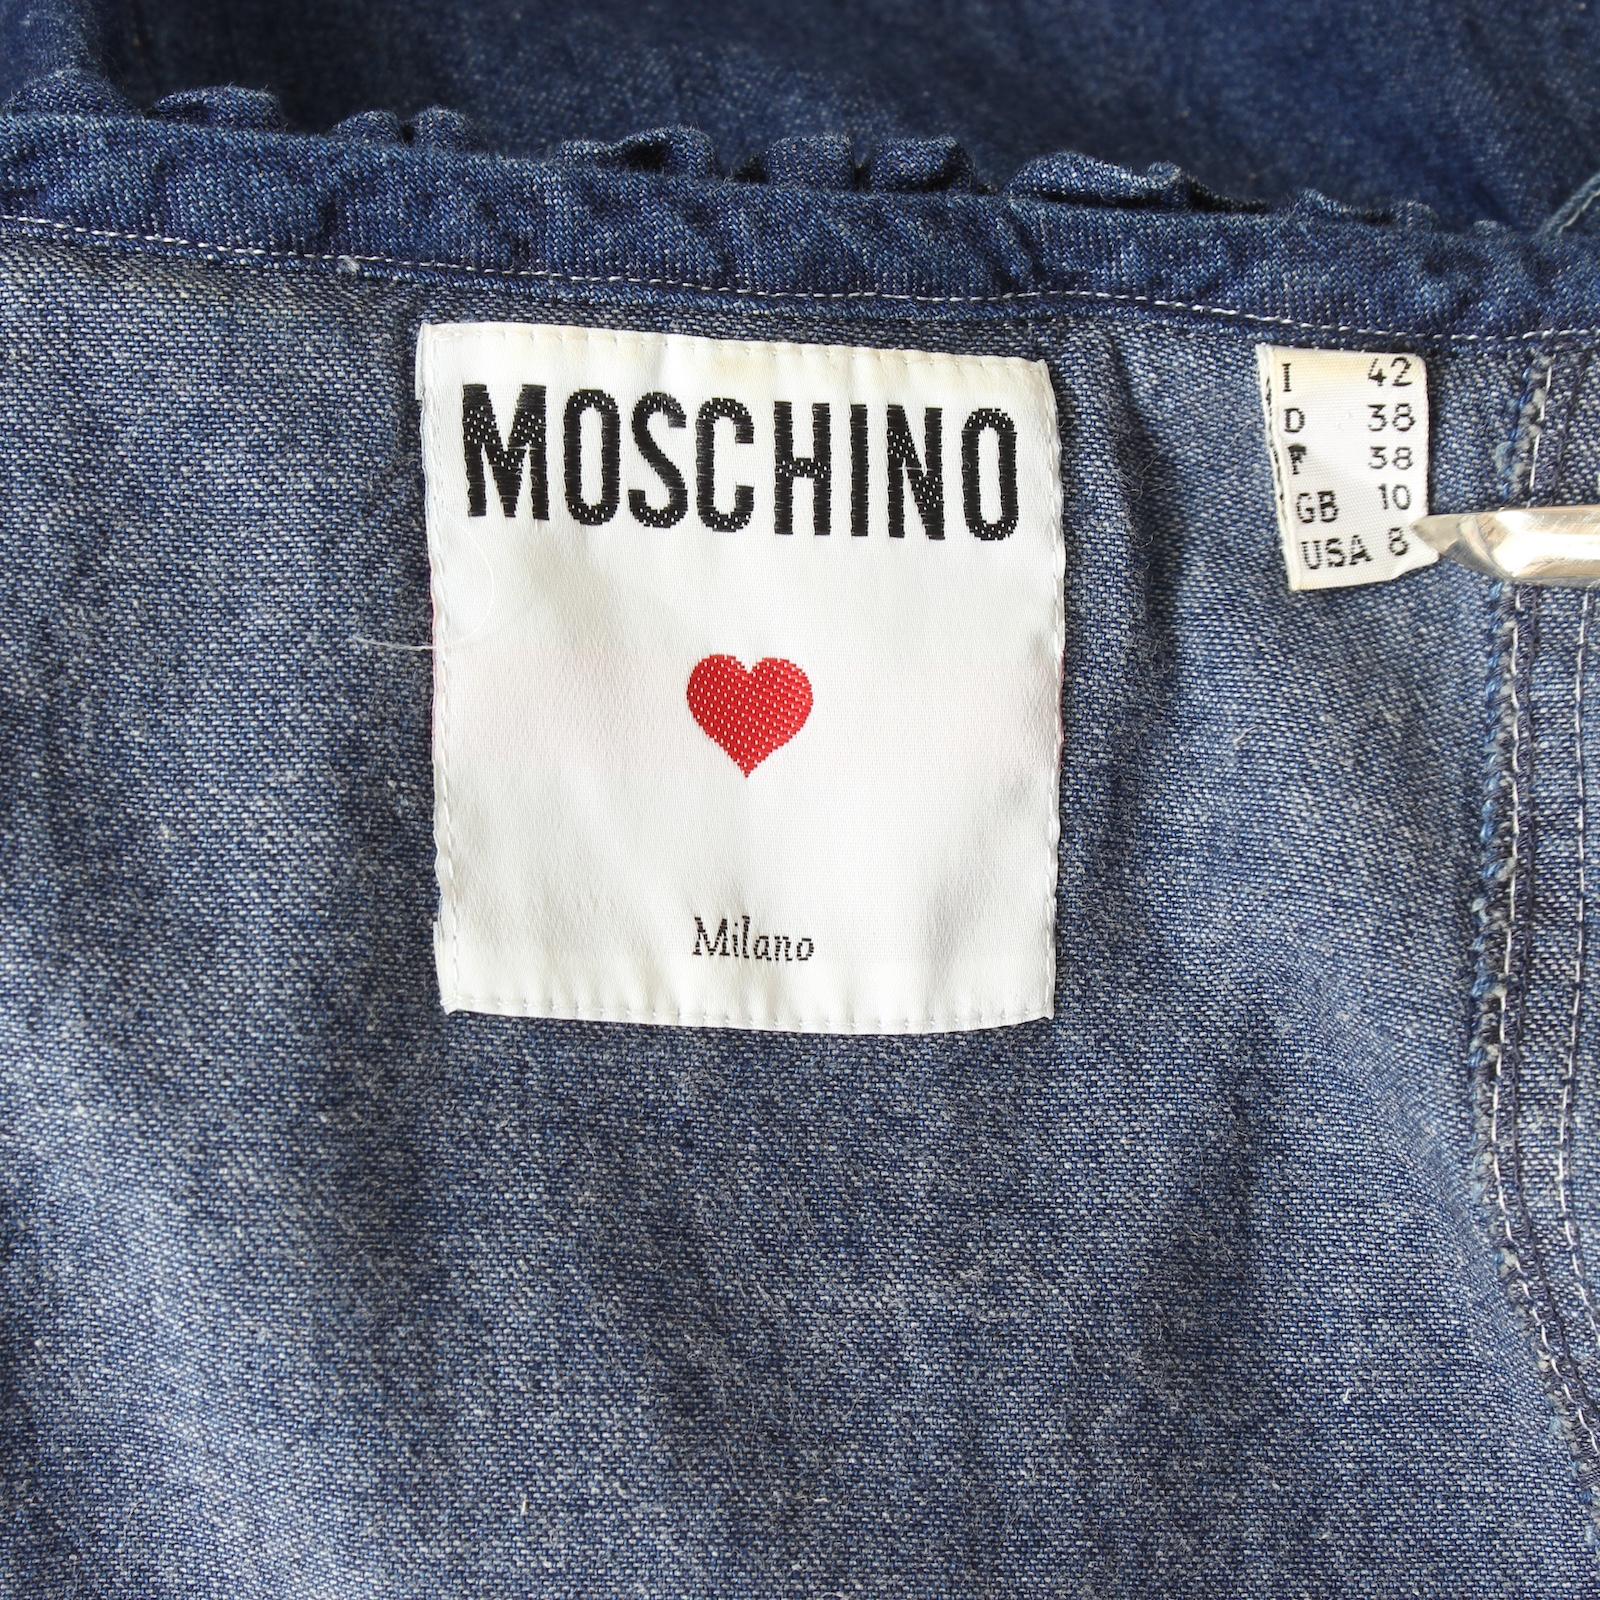 Moschino Blue Jeans Denim Rouches Dress 1980s For Sale 3